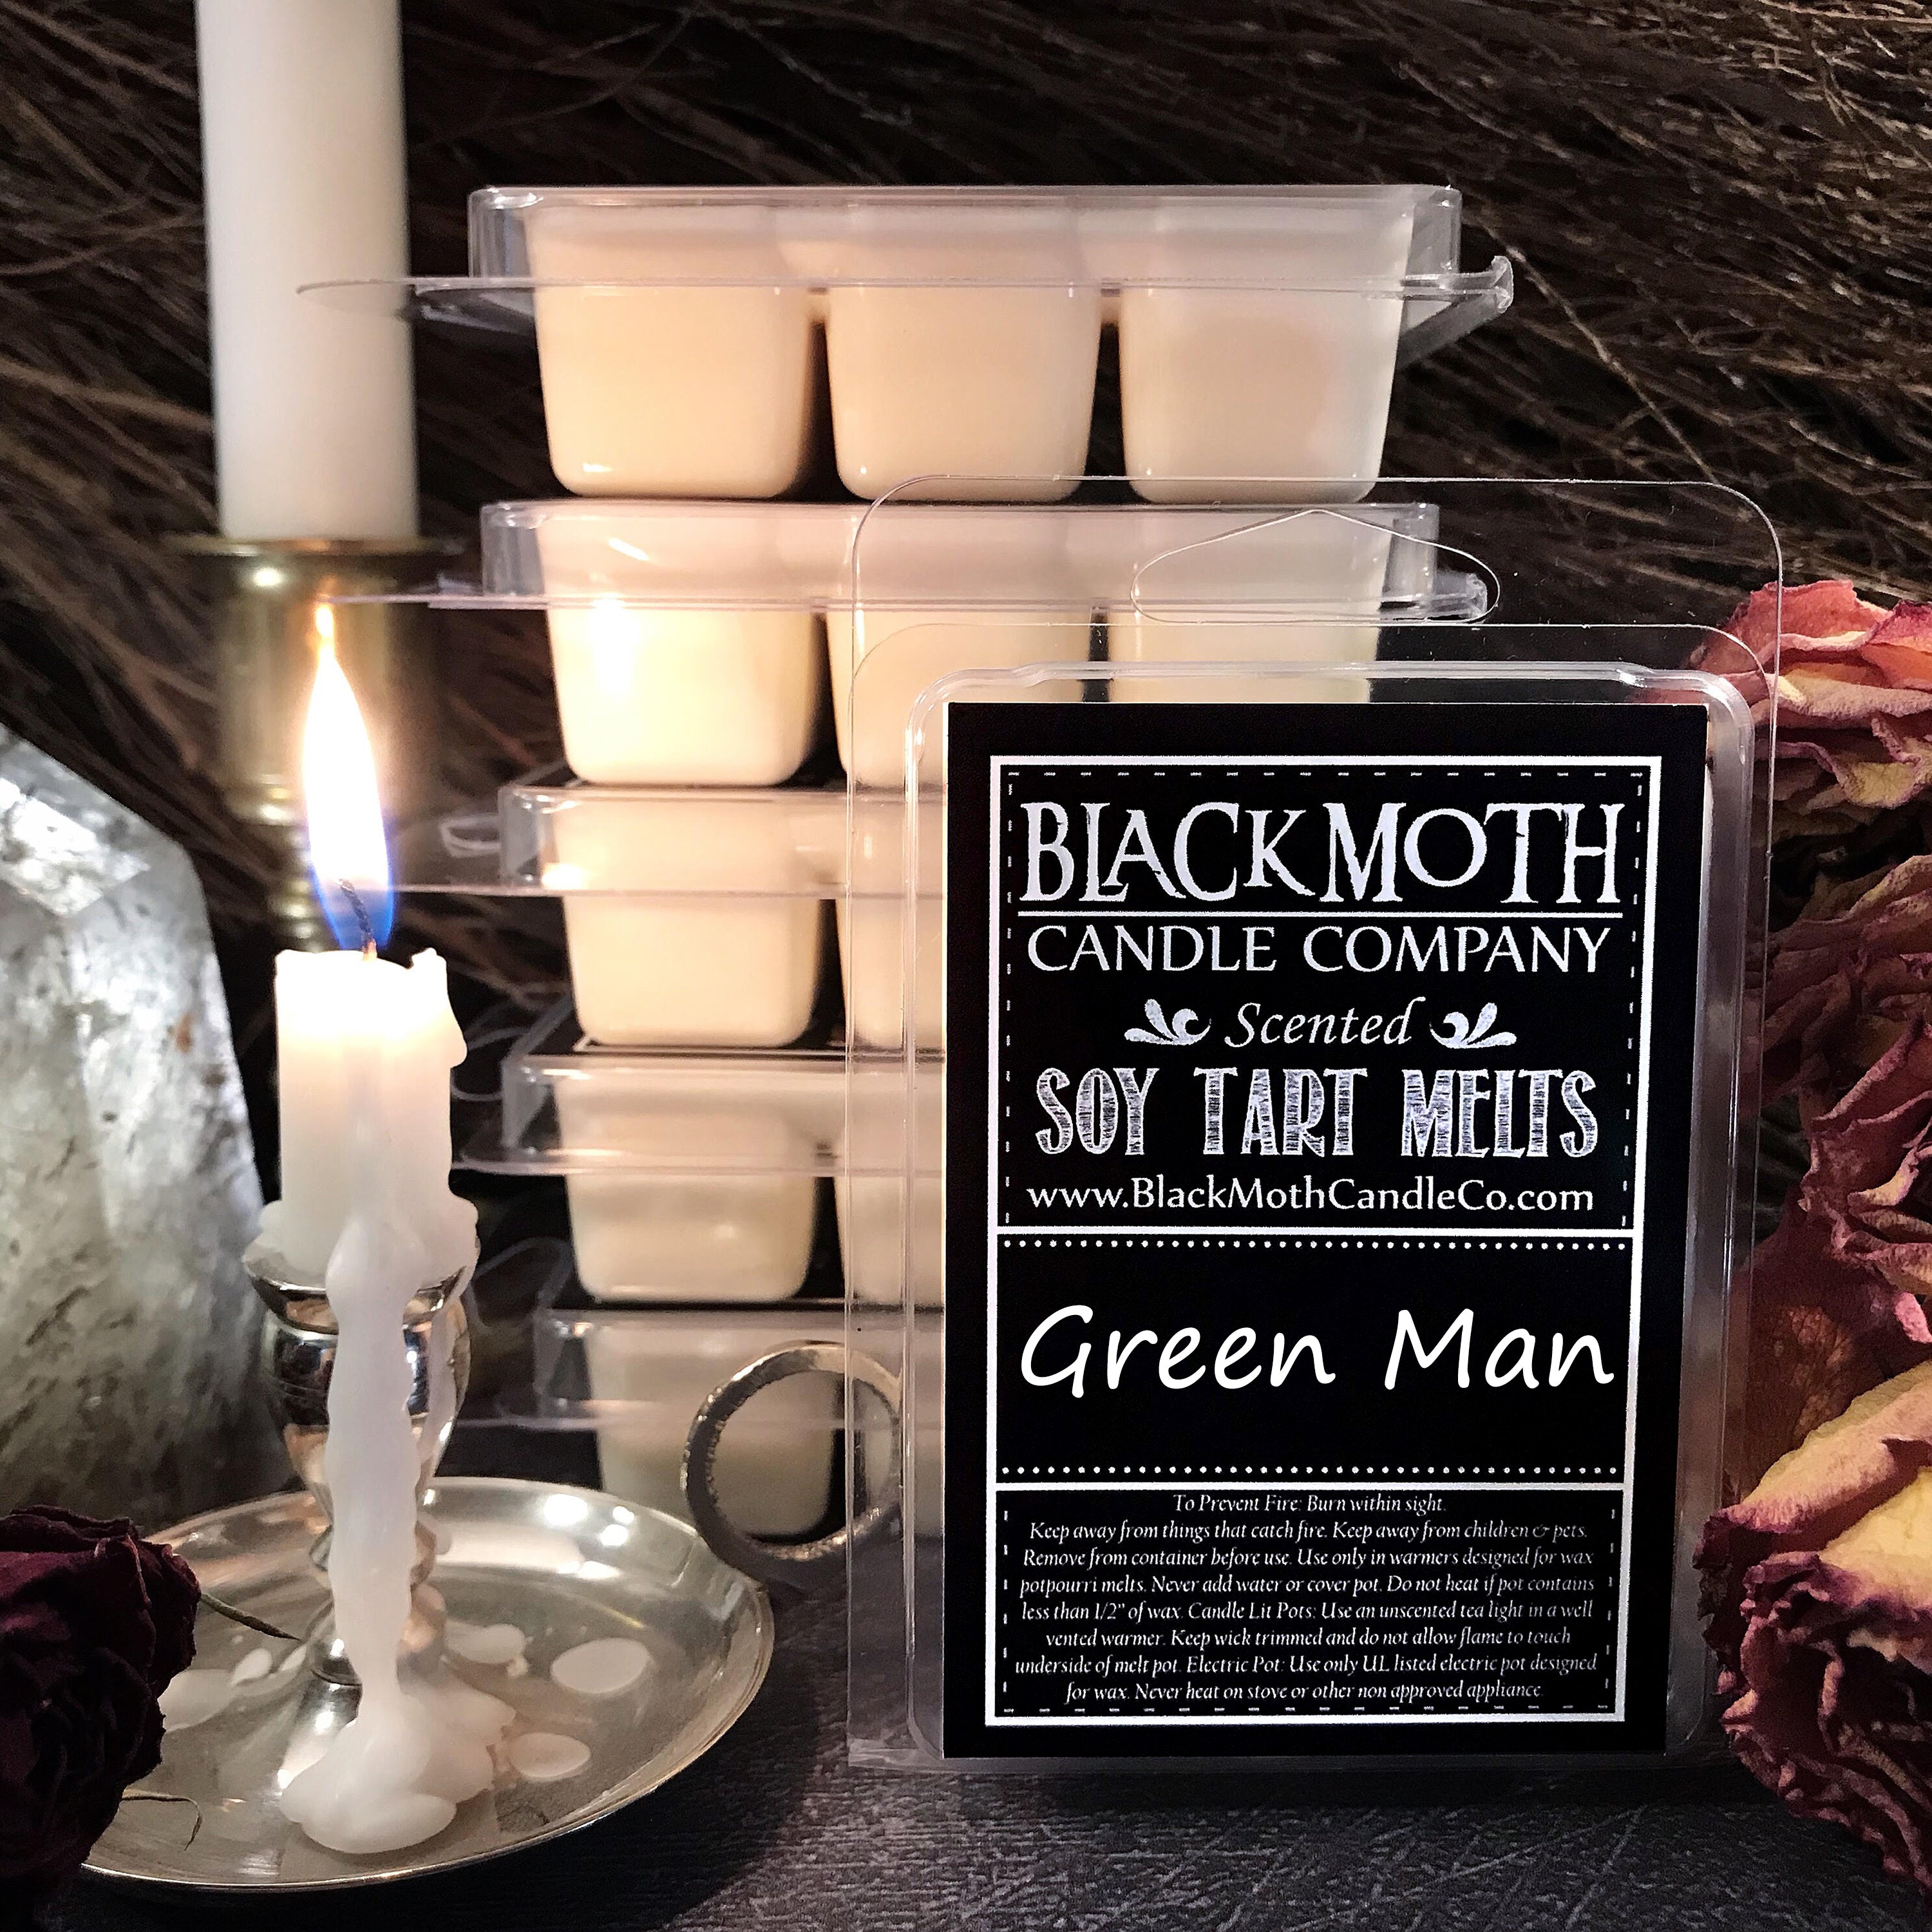 Green Man Scented Soy Wax Melts